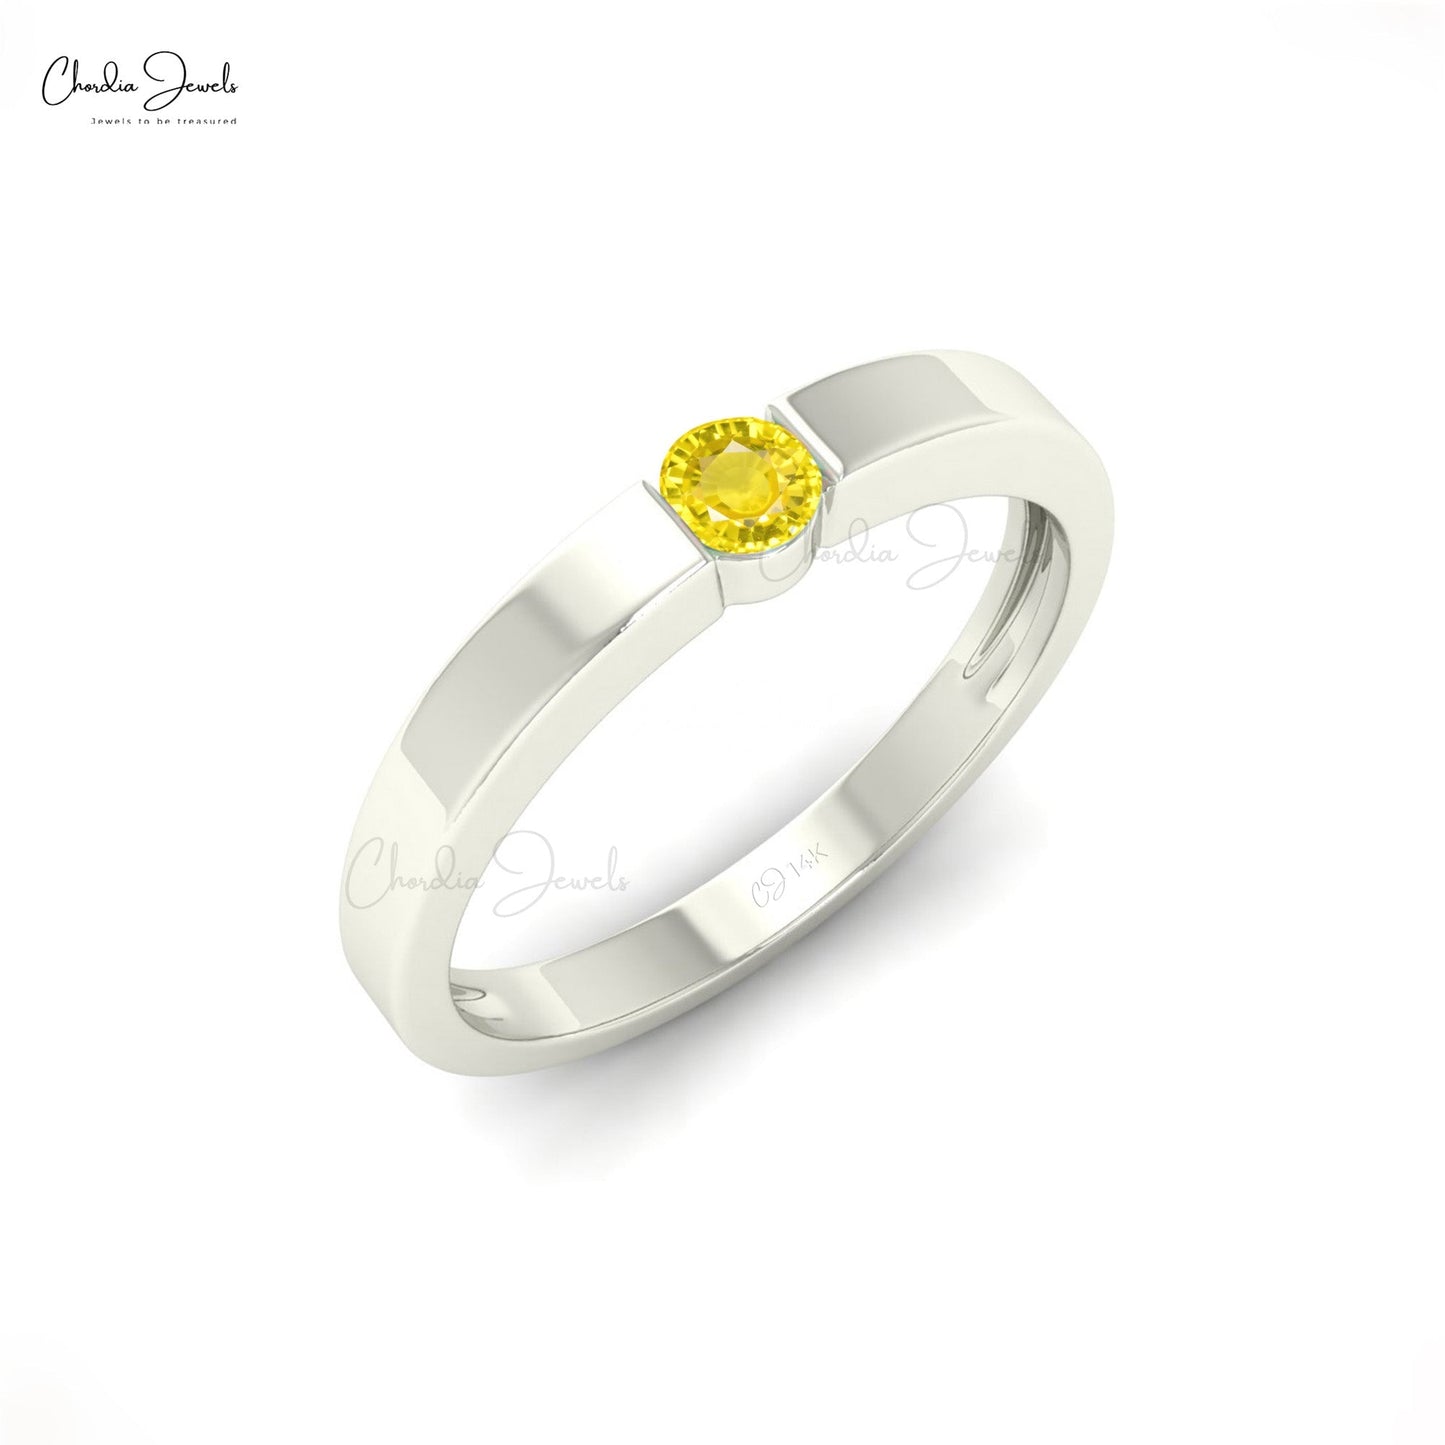 Round Cut Yellow Sapphire Solitaire Ring in 14K Gold